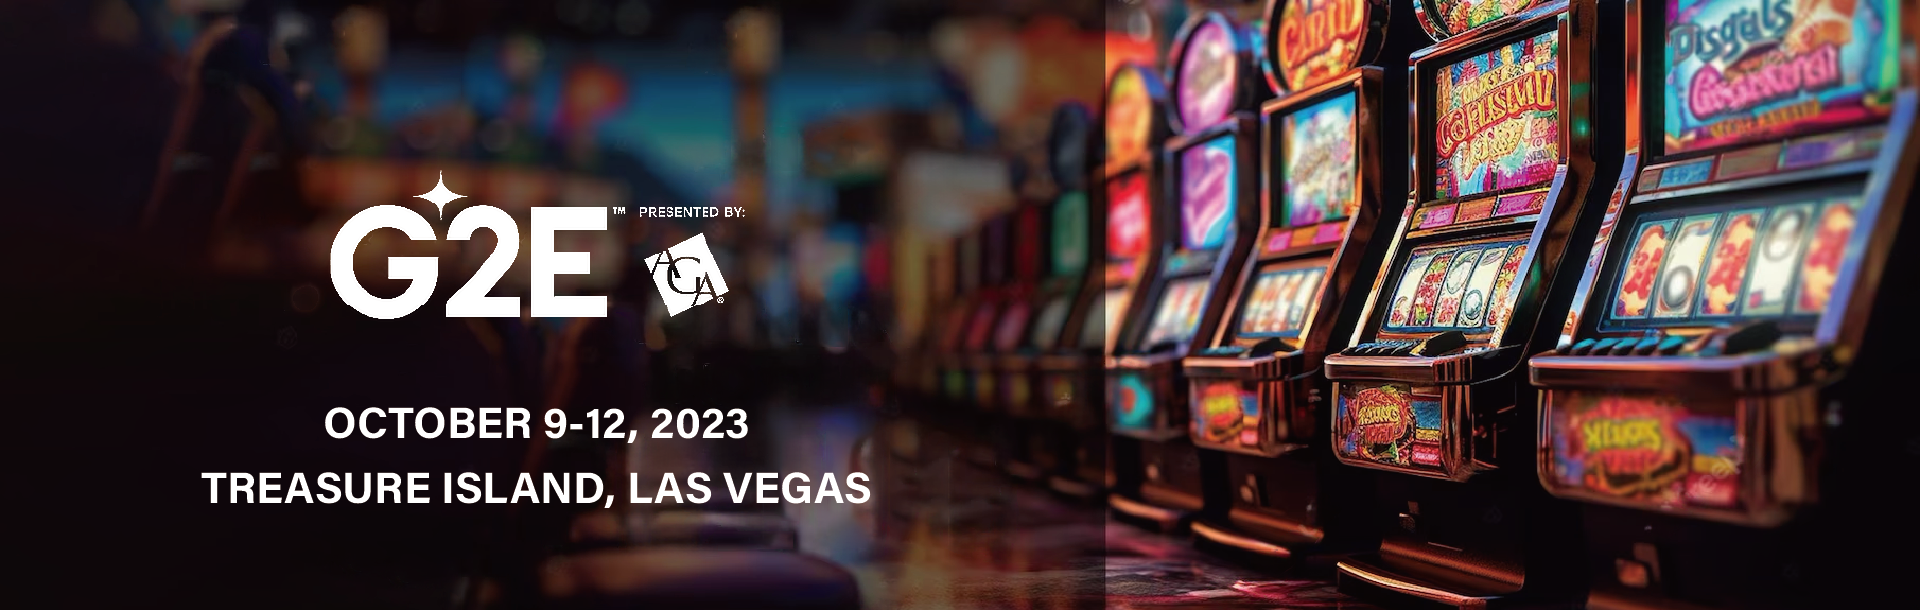 If you want to be in gaming, then G2E in Las Vegas is the place to be